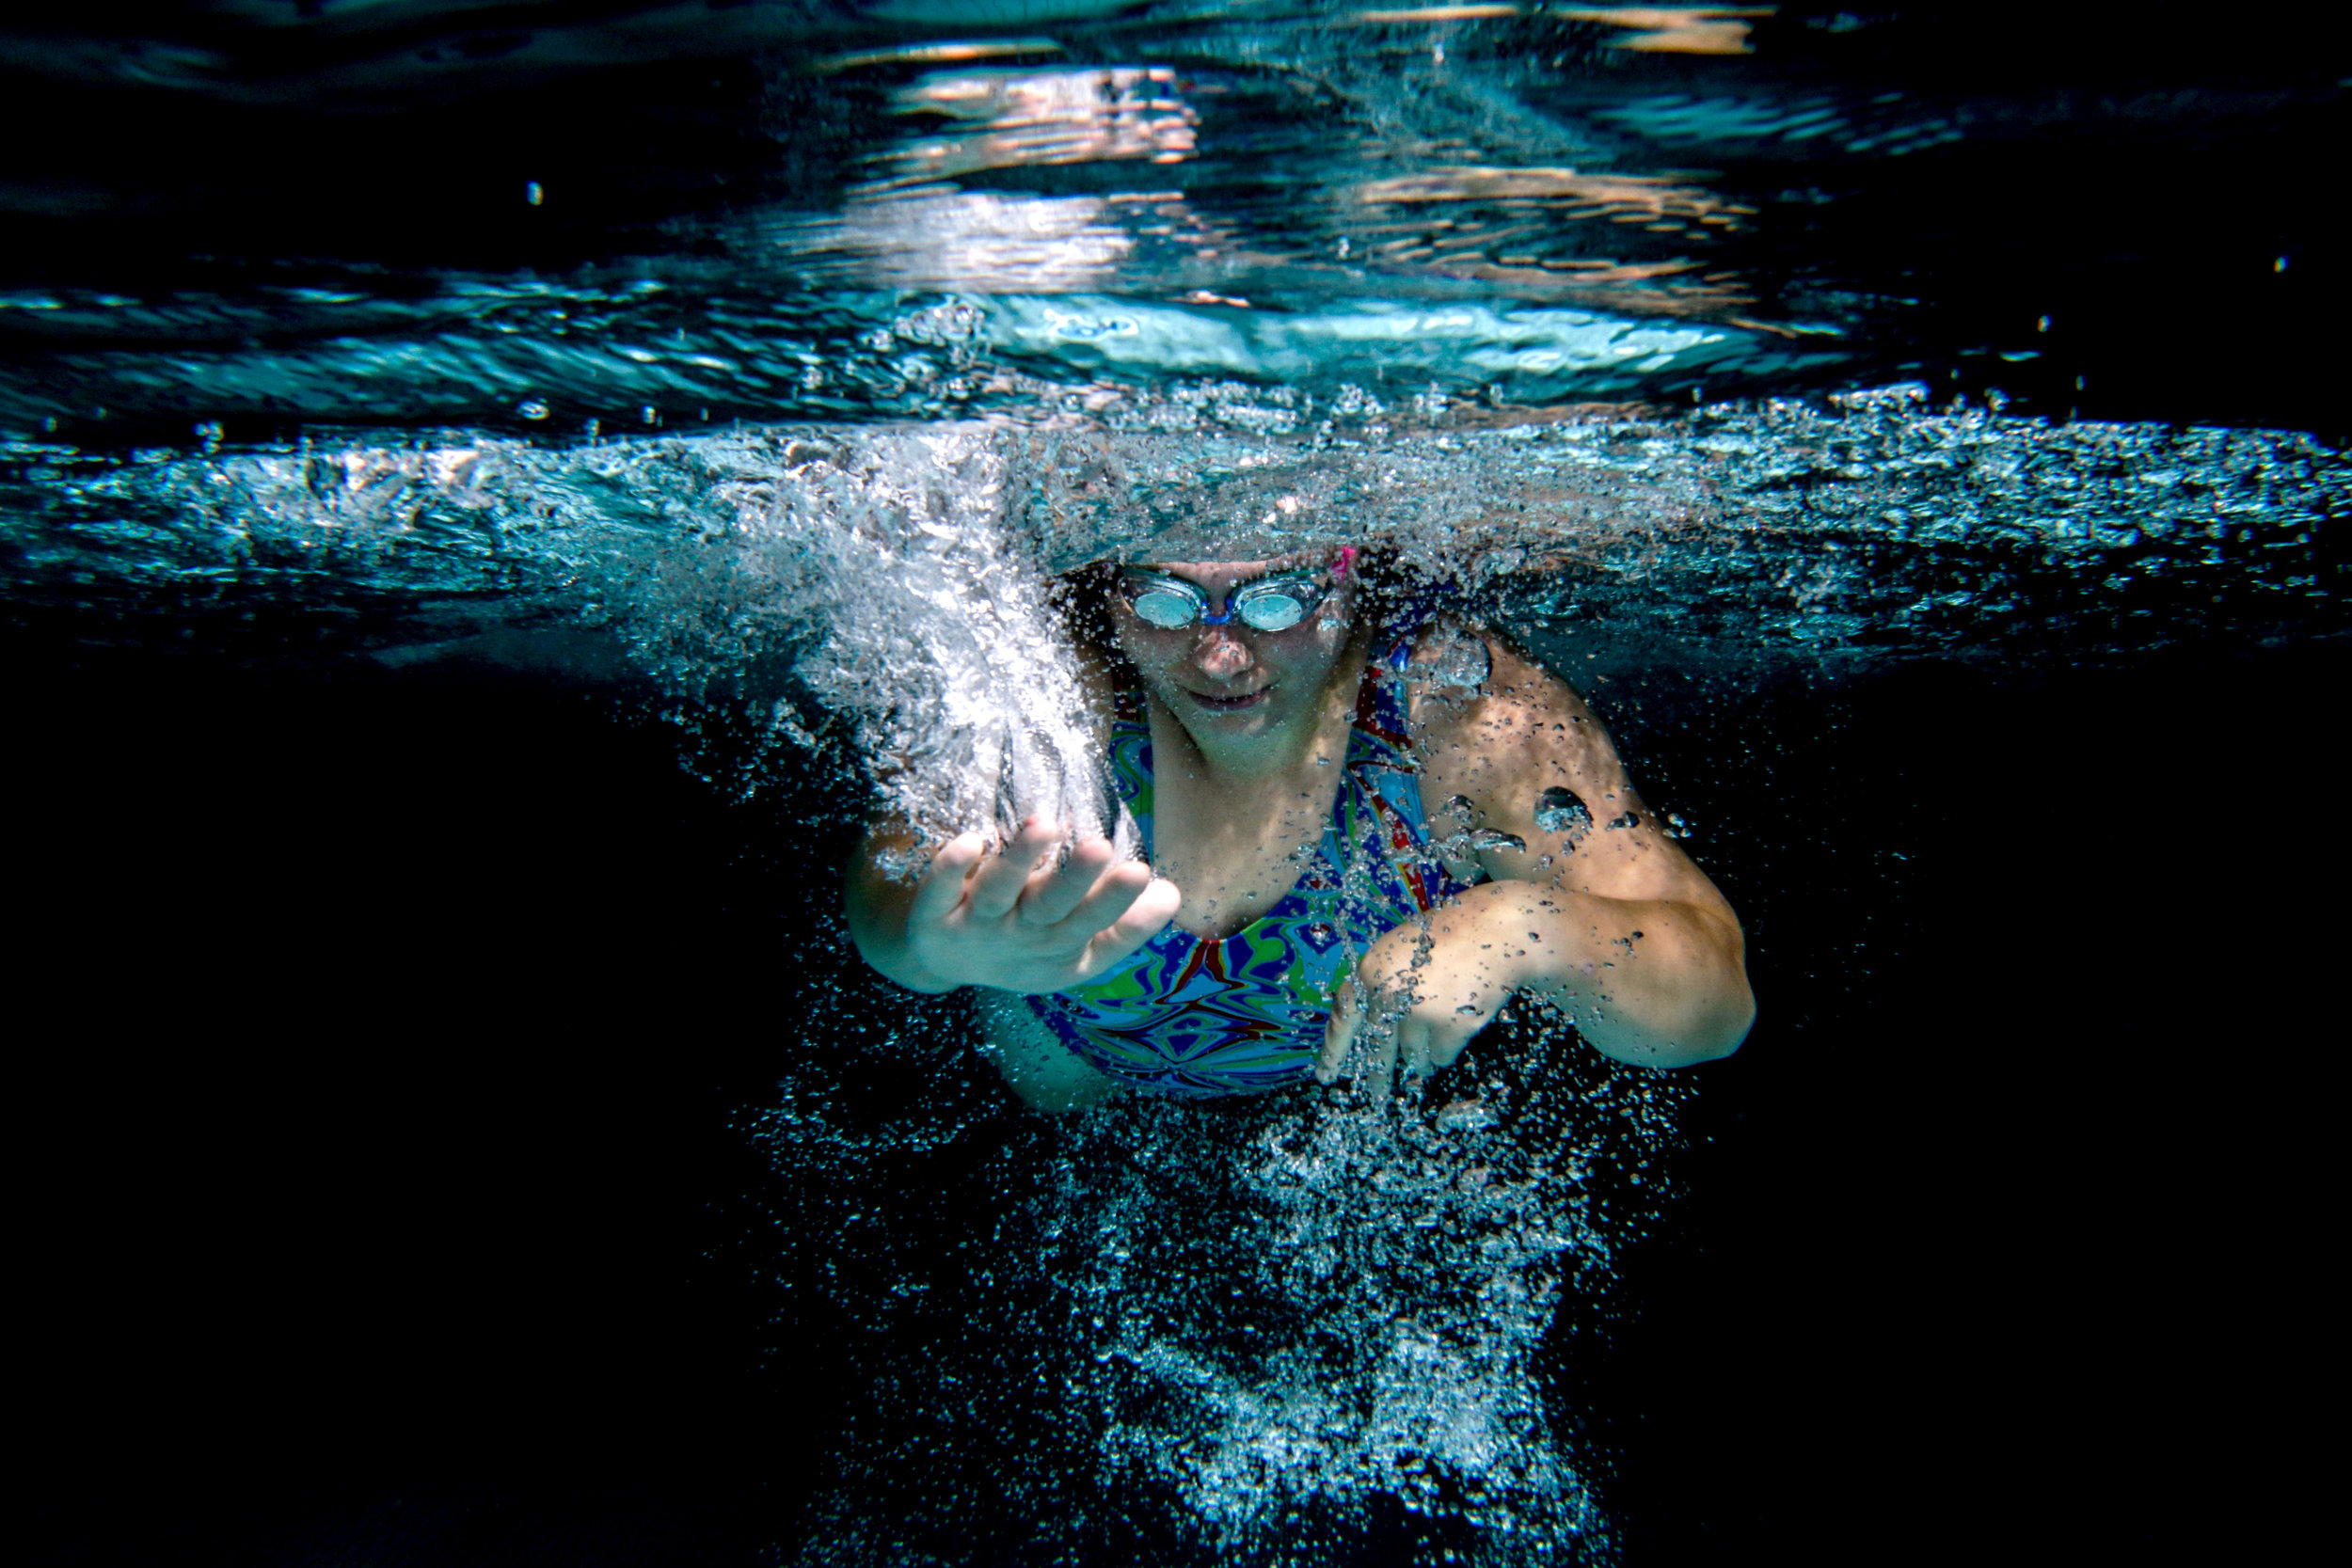  Special Olympic athlete on the Upper Valley Hawks team Rose Kerrigan, of White River Junction, Vt., swims through the water at CCBA's Witherell Recreation Center in Lebanon, N.H., on Friday, Aug. 31, 2018. When it comes to important moments, Kerriga